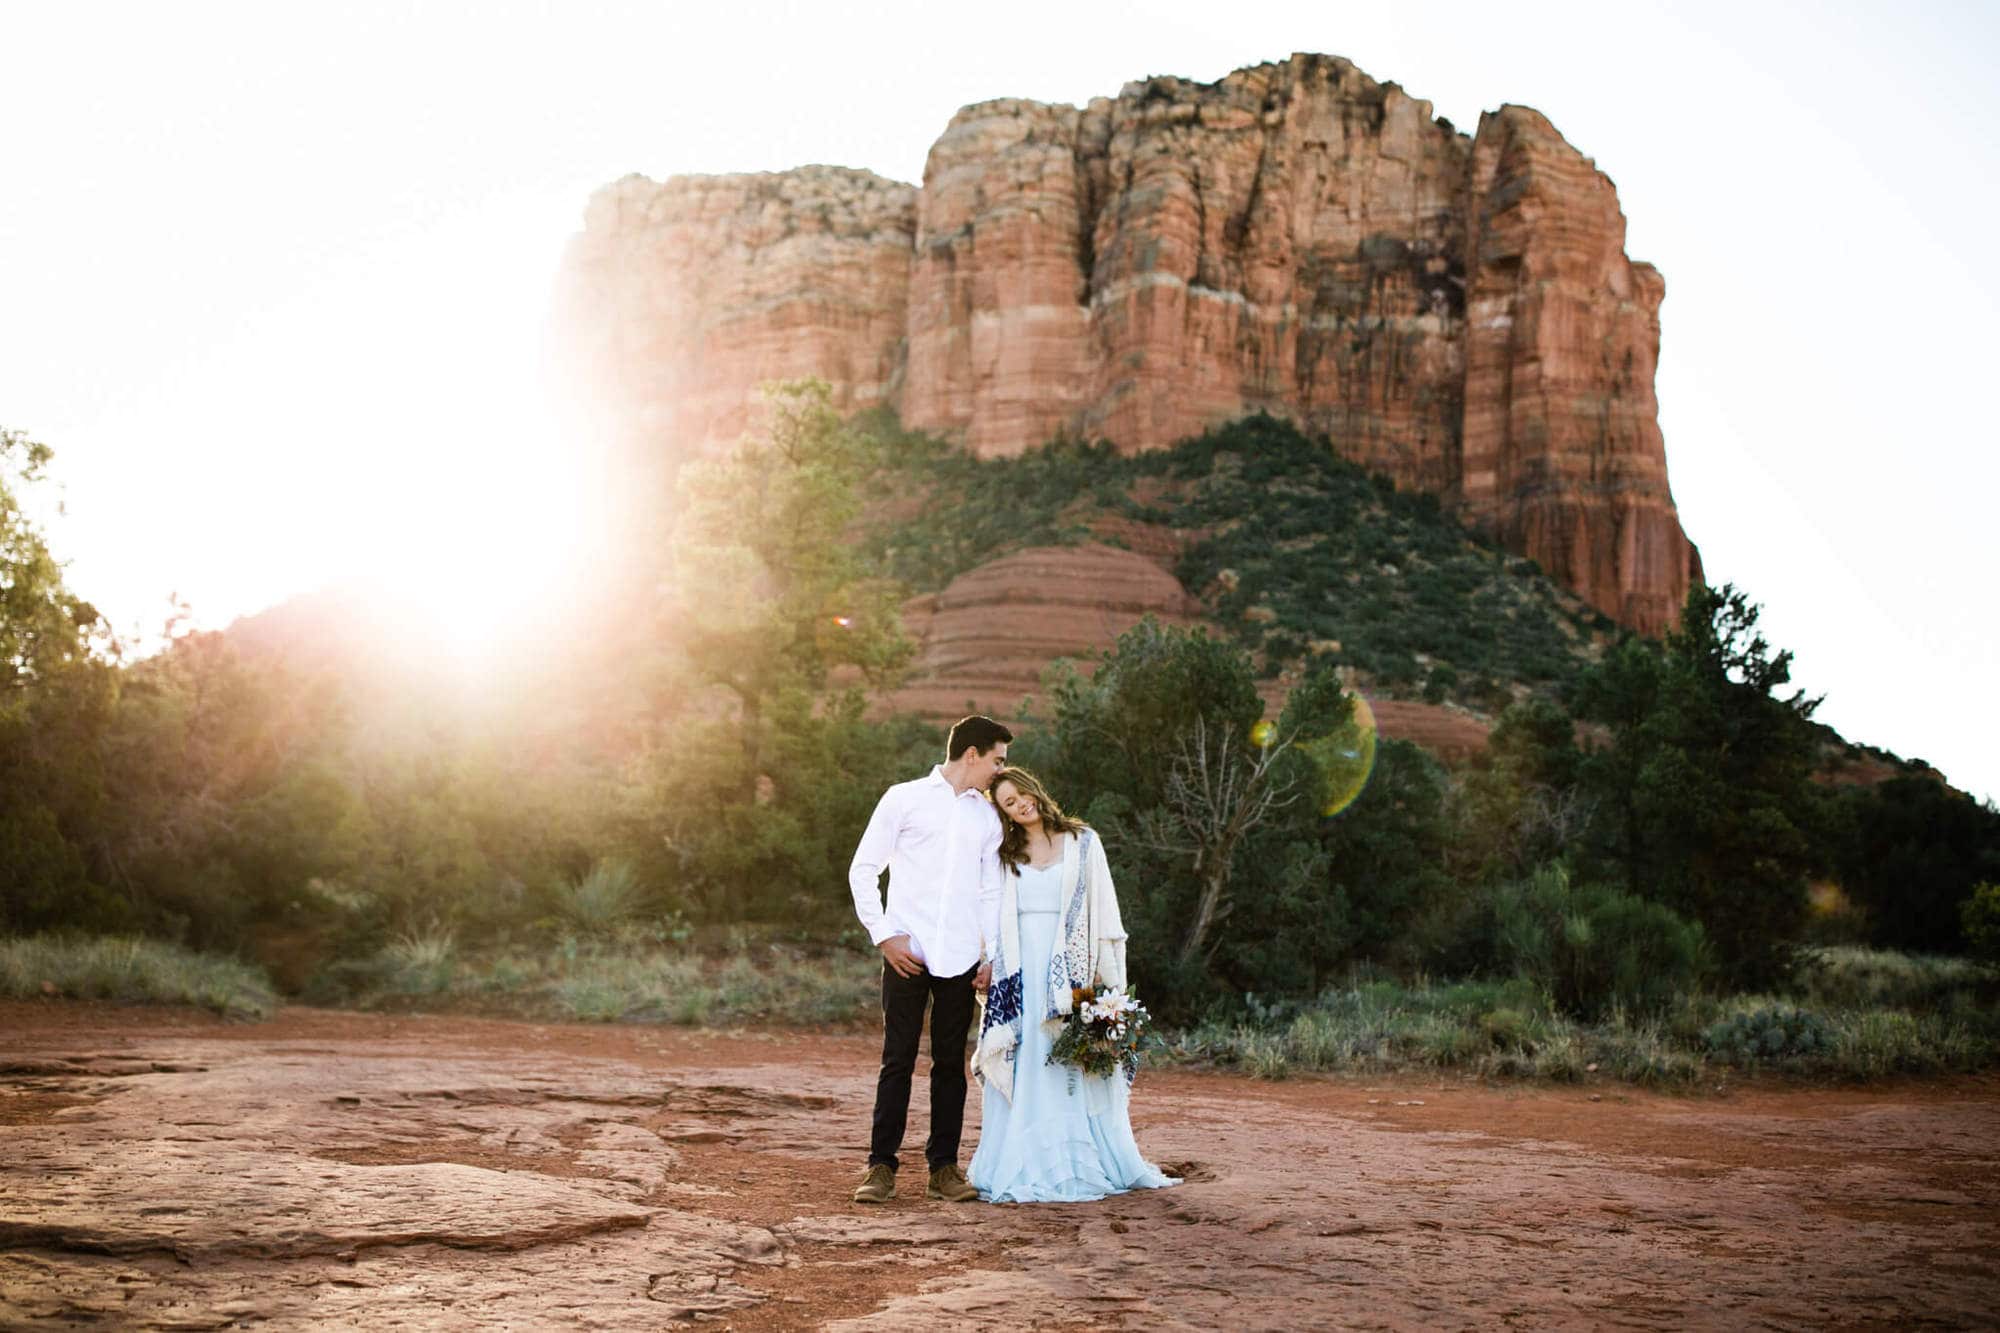 The bride rests her head on her groom's shoulder. He kisses her head and Courthouse Butte stands tall behind them.